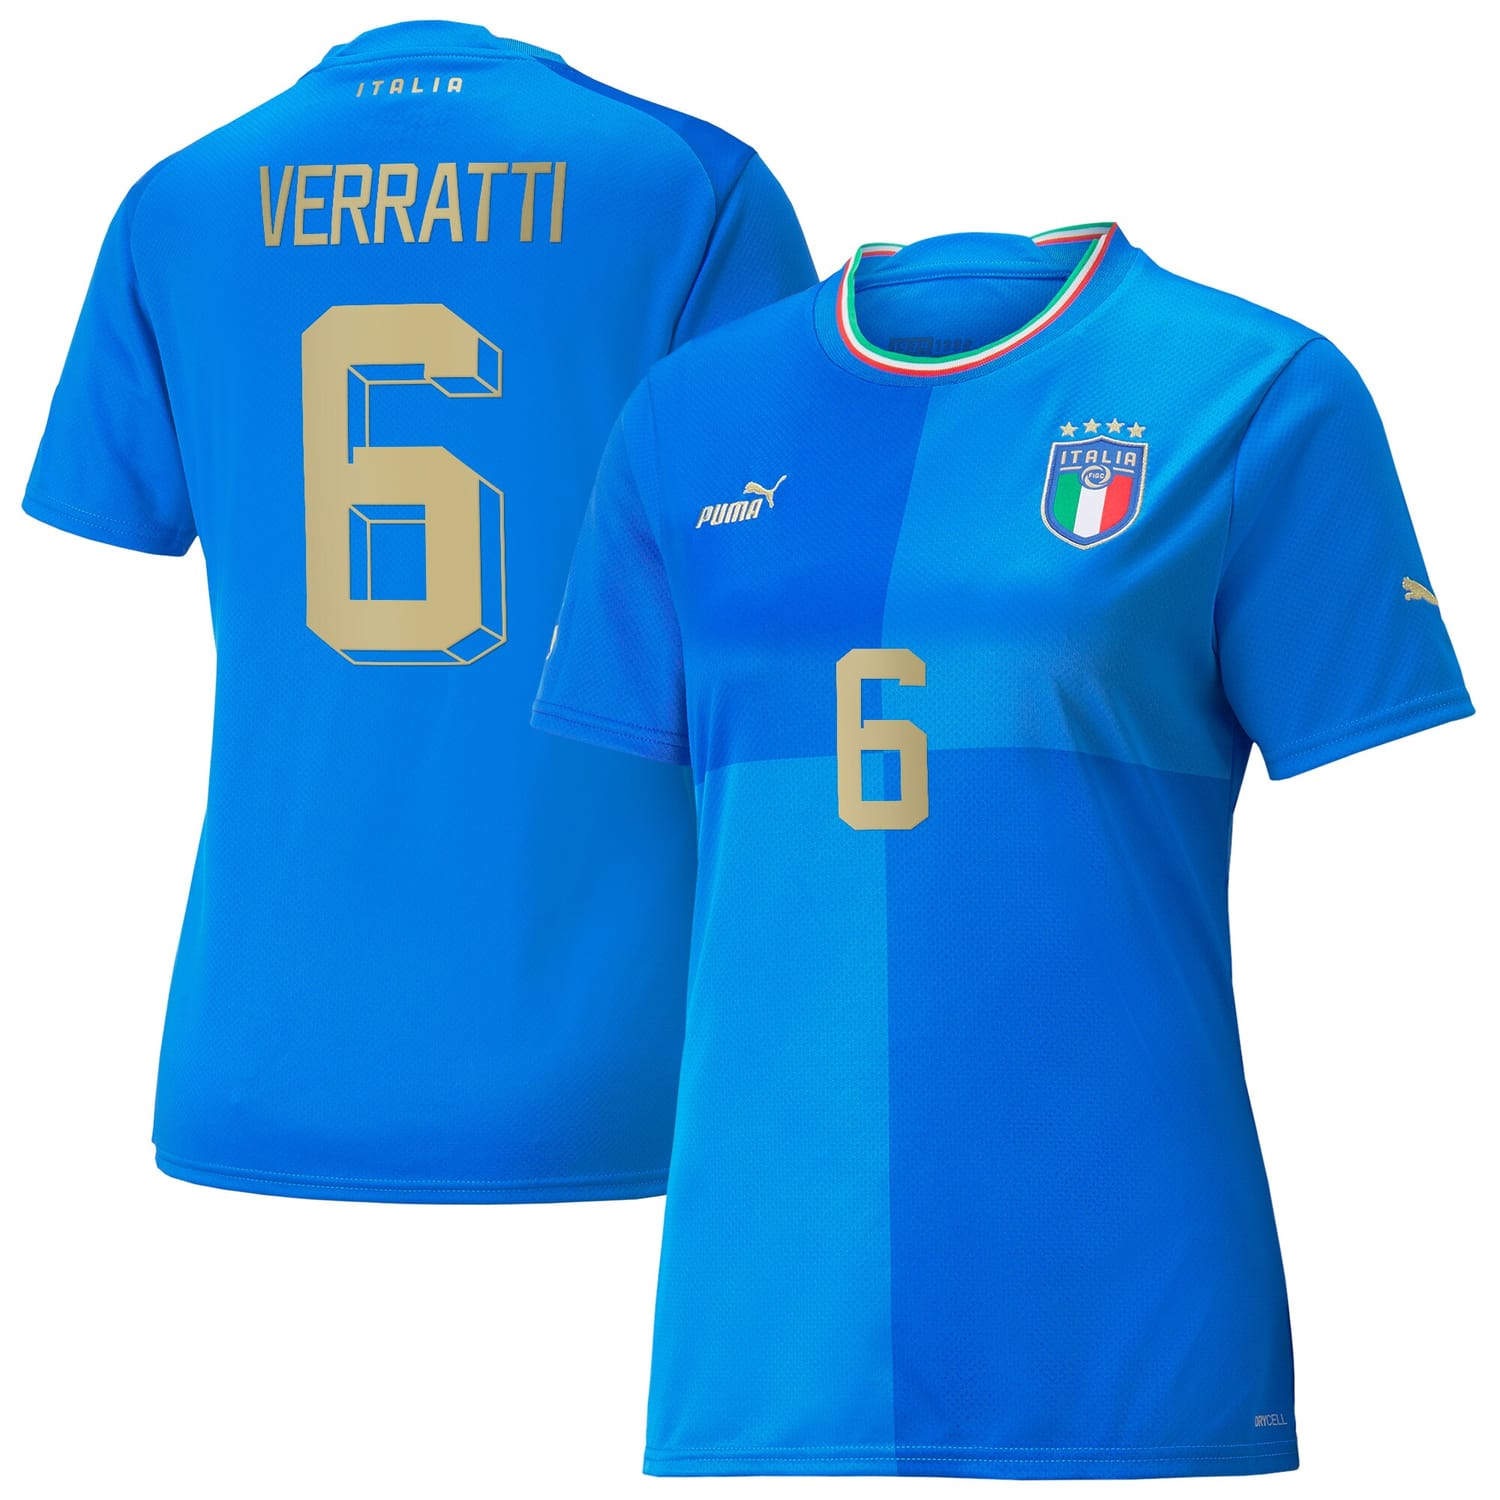 Italy National Team Home Jersey Shirt Blue 2022-23 player Marco Verratti printing for Women